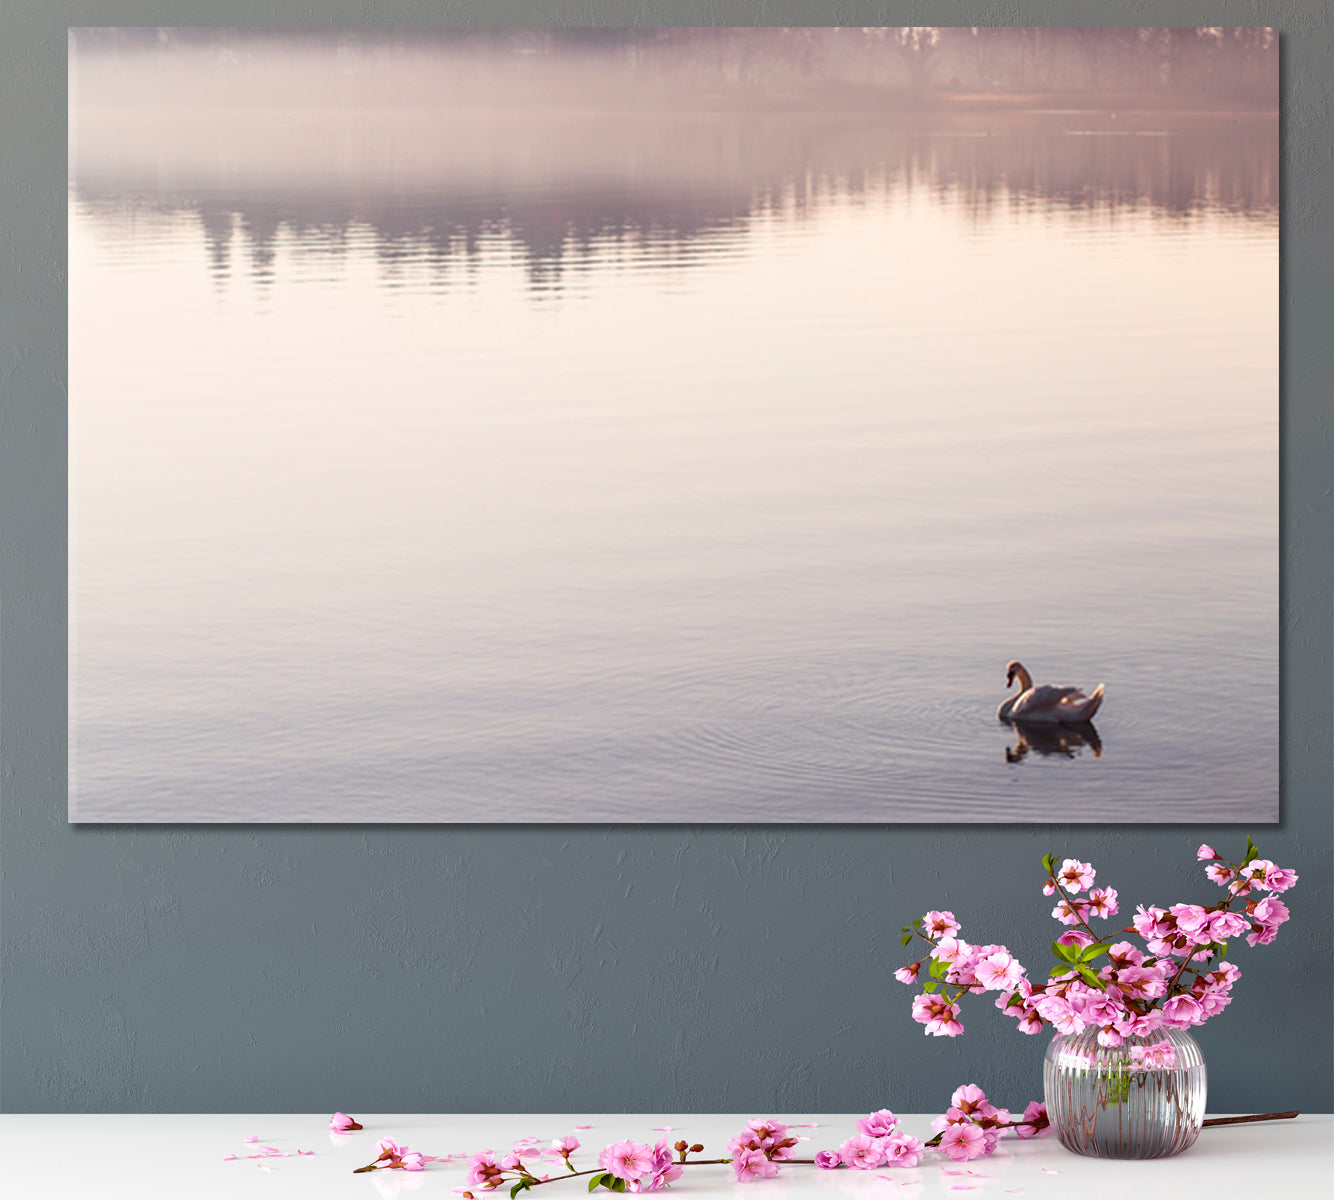 SERENITY Peaceful Landscape Water Reflection Bodensee Lake Germany Little Bird Duck Flapping Wings in the Water Scenery Landscape Fine Art Print Artesty 1 panel 24" x 16" 